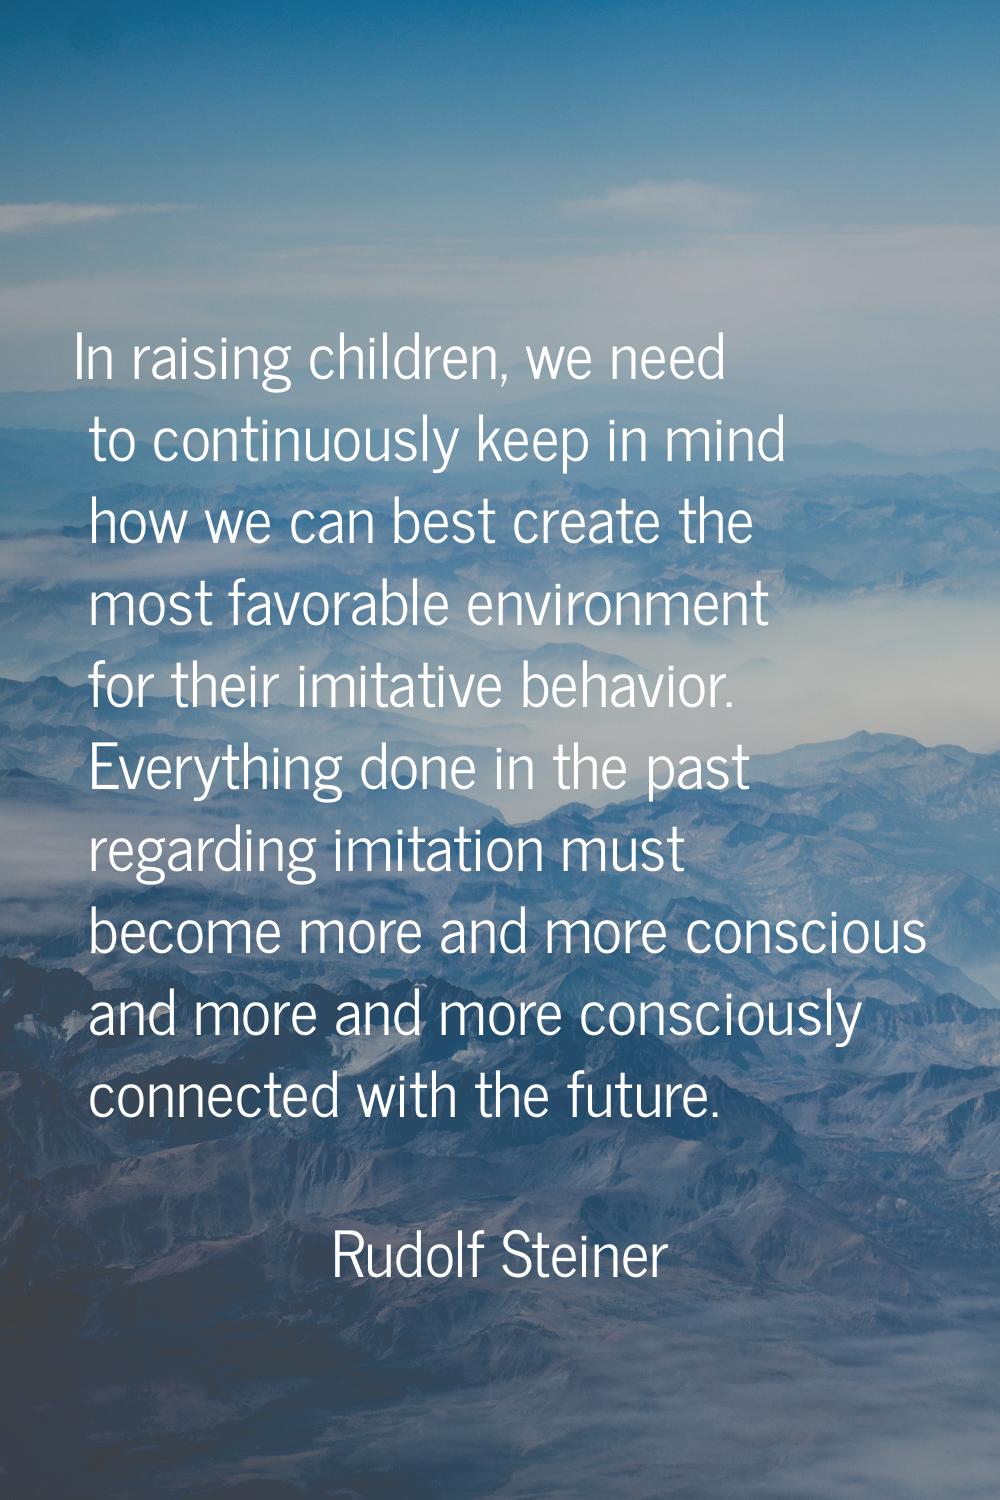 In raising children, we need to continuously keep in mind how we can best create the most favorable